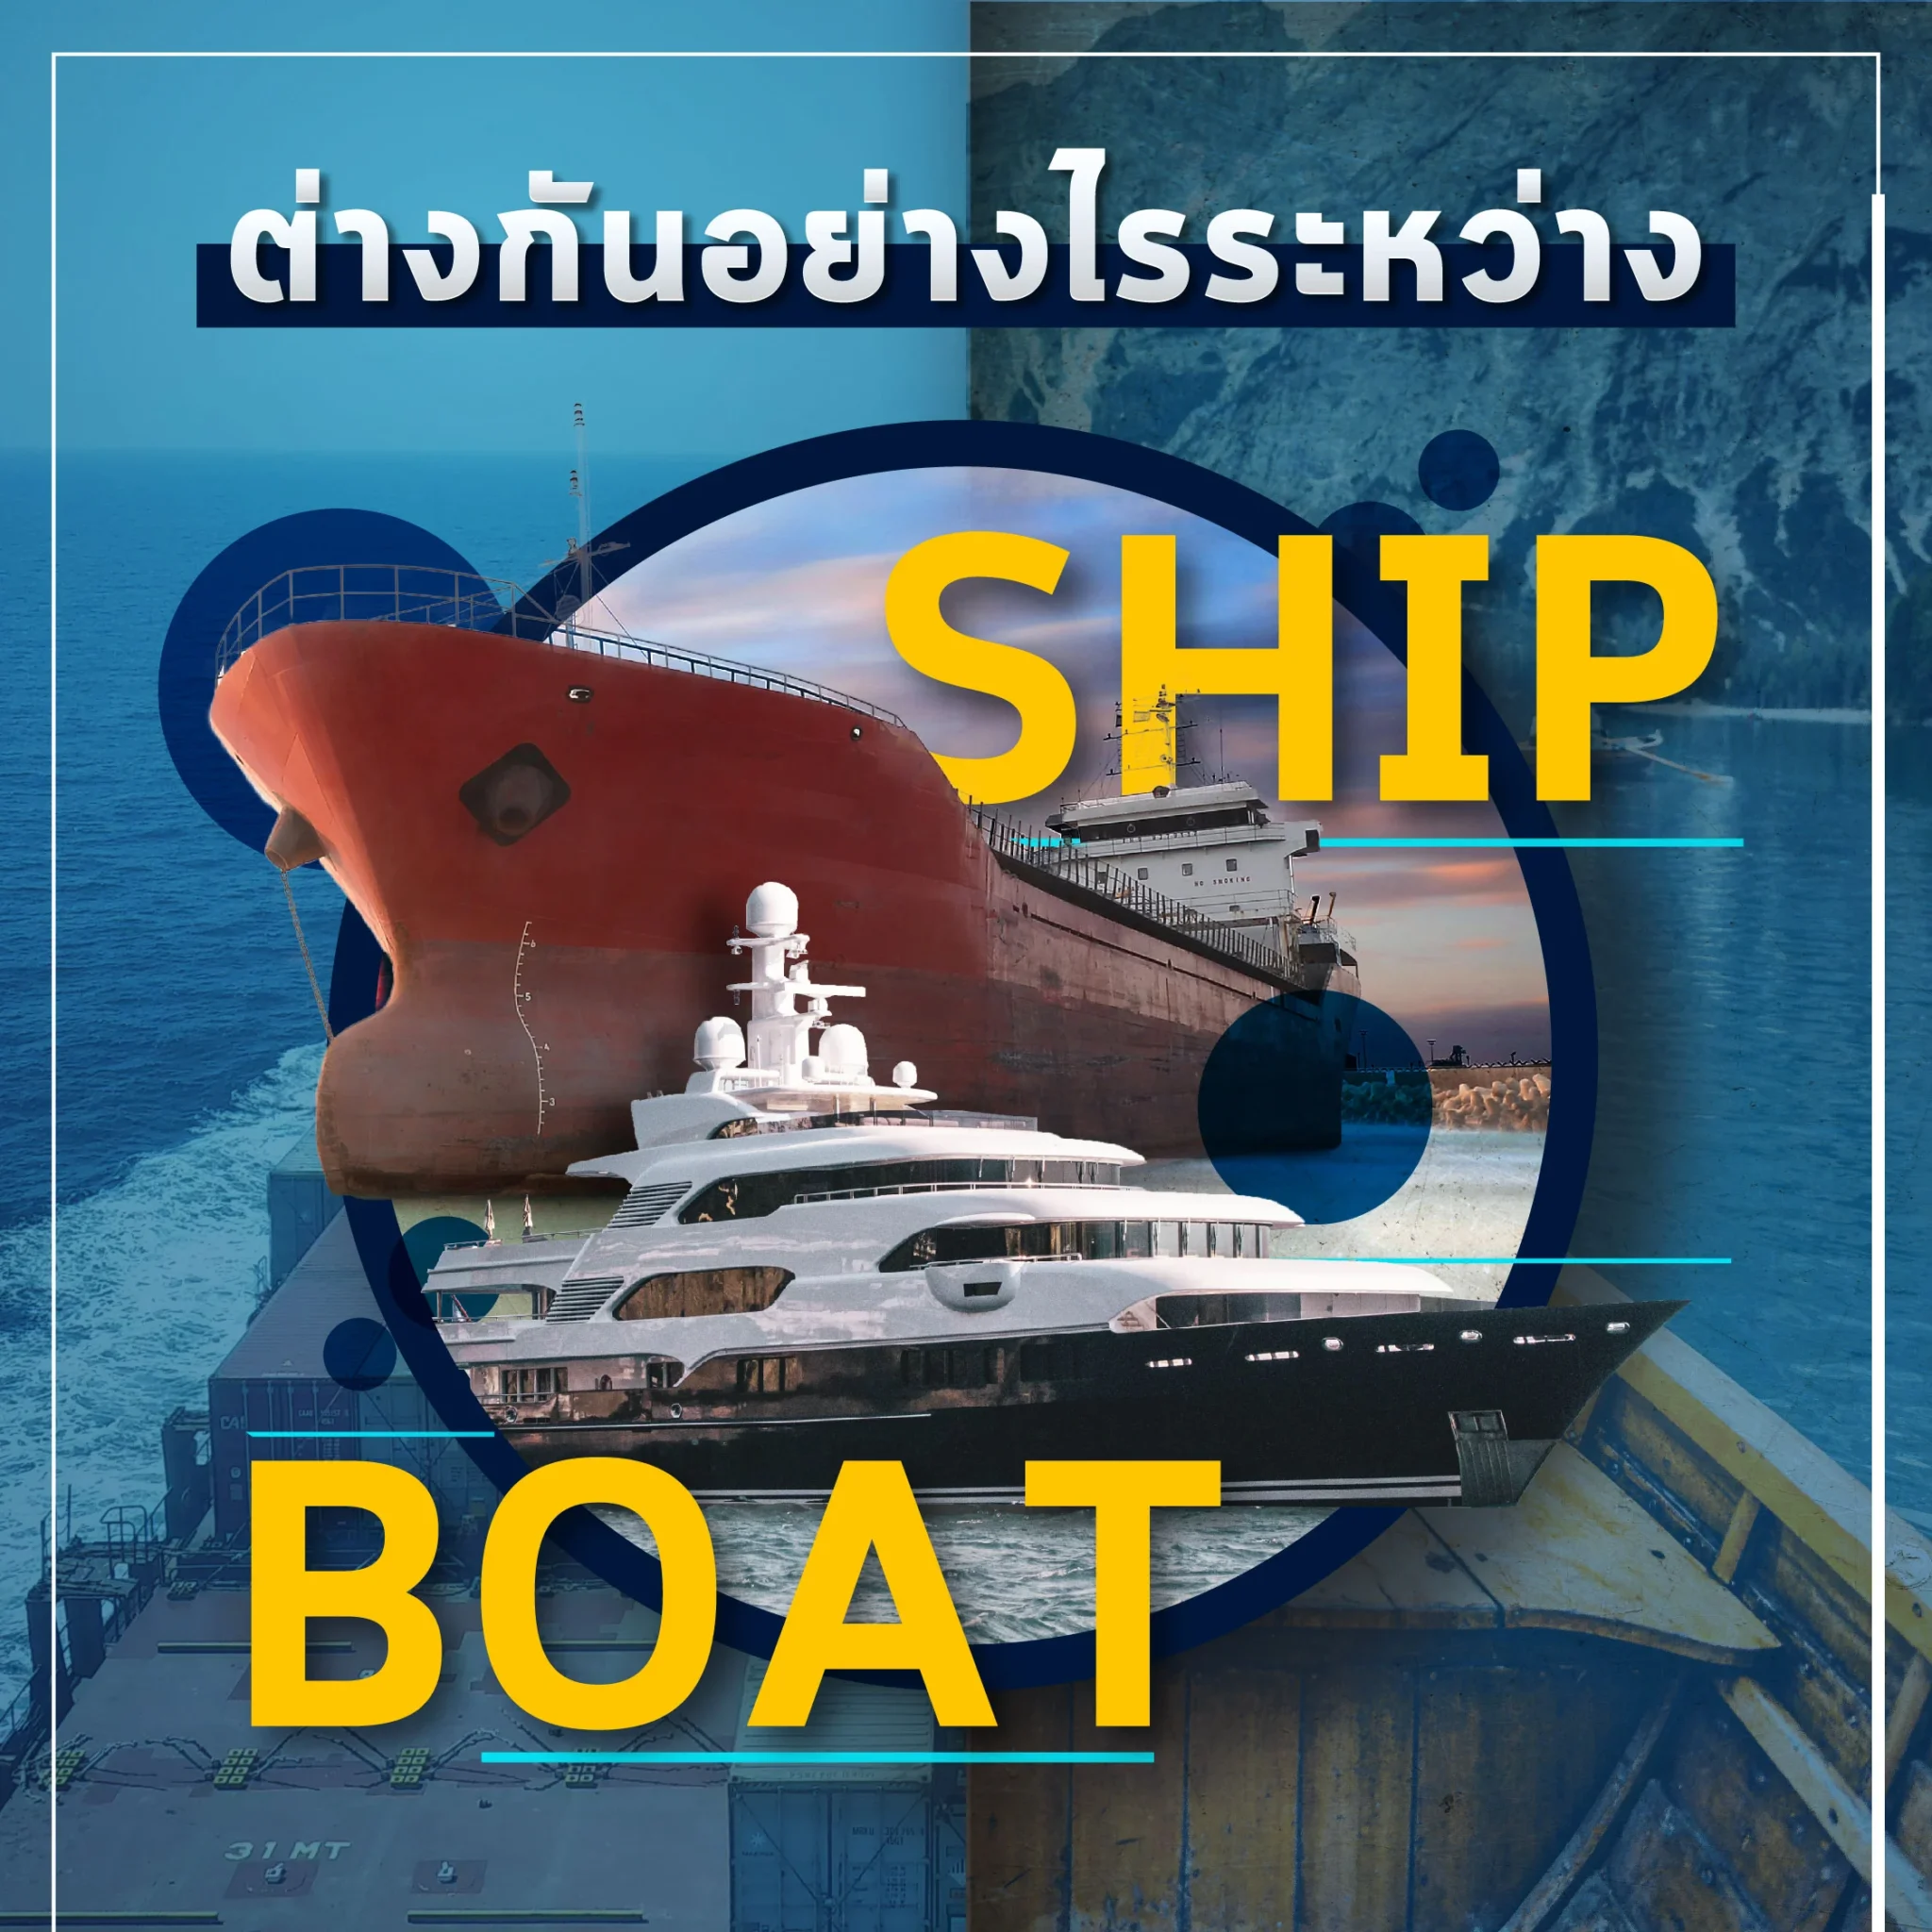 What’s the difference between “Boat” and “Ship”?